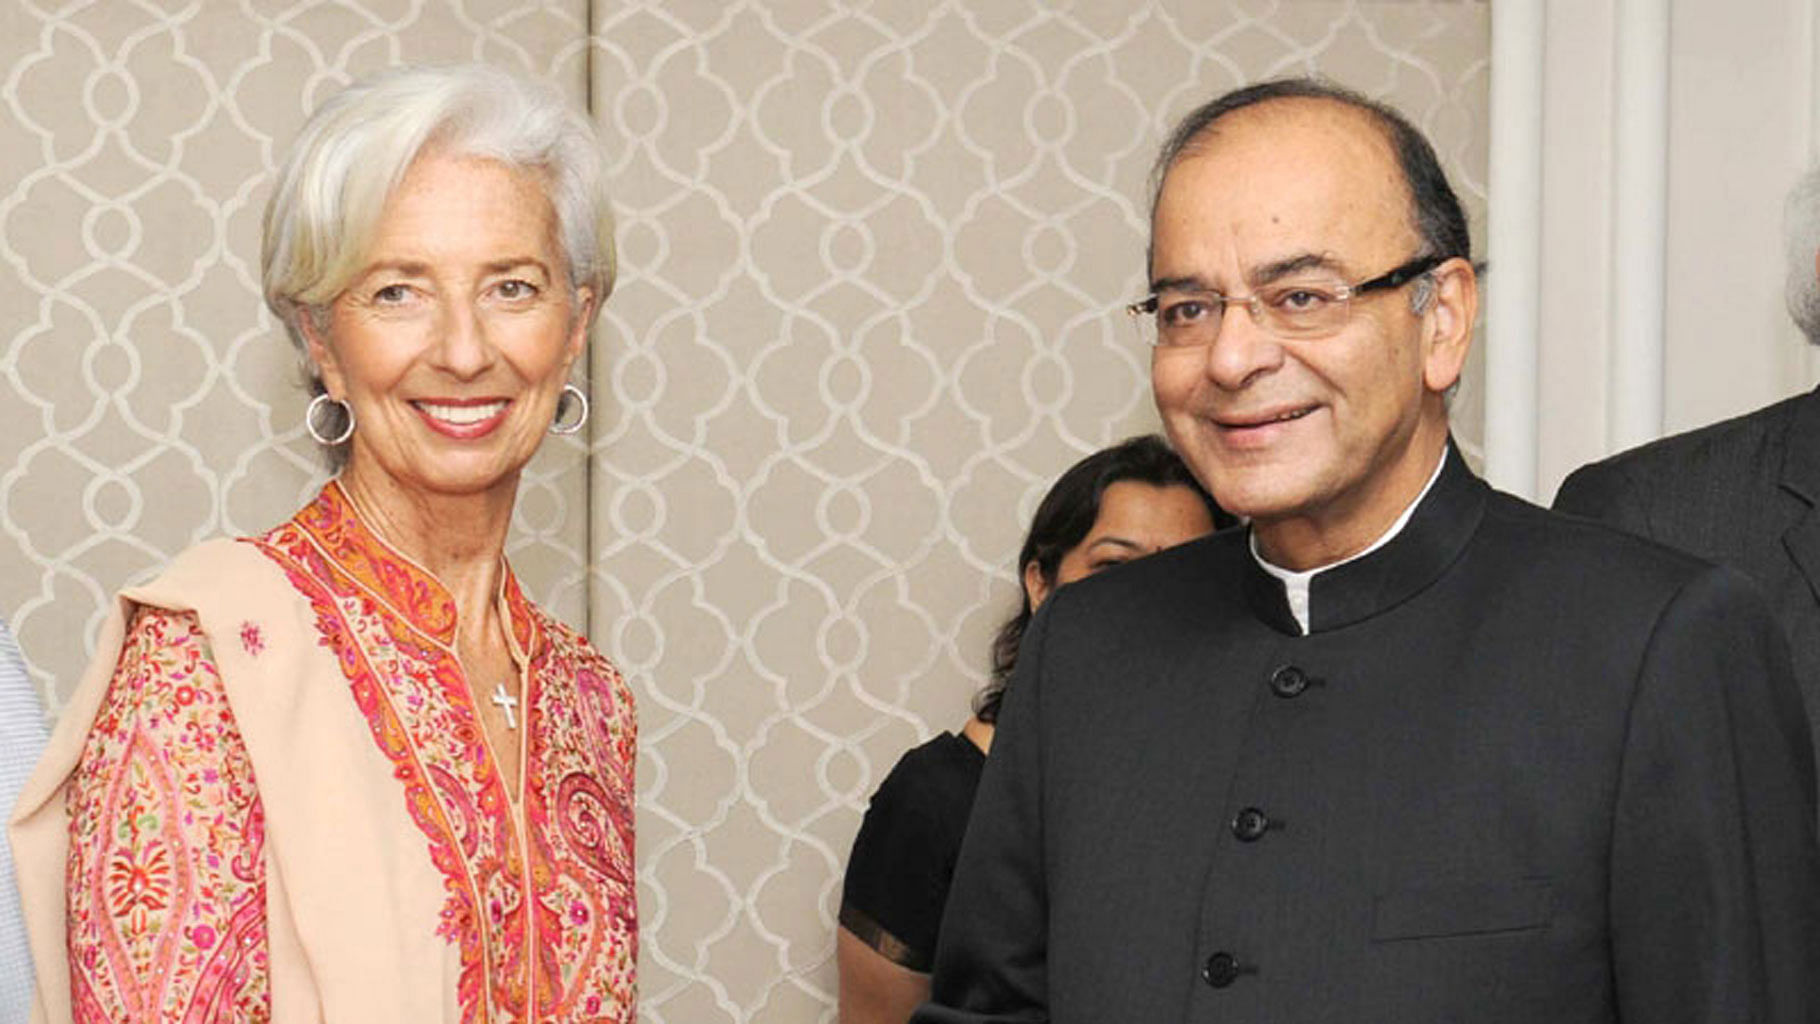 Managing Director of International Monetary Fund (IMF) Christine Lagarde and Finance Minister Arun Jaitley and a bilateral meeting in New Delhi on 11 March 2016.